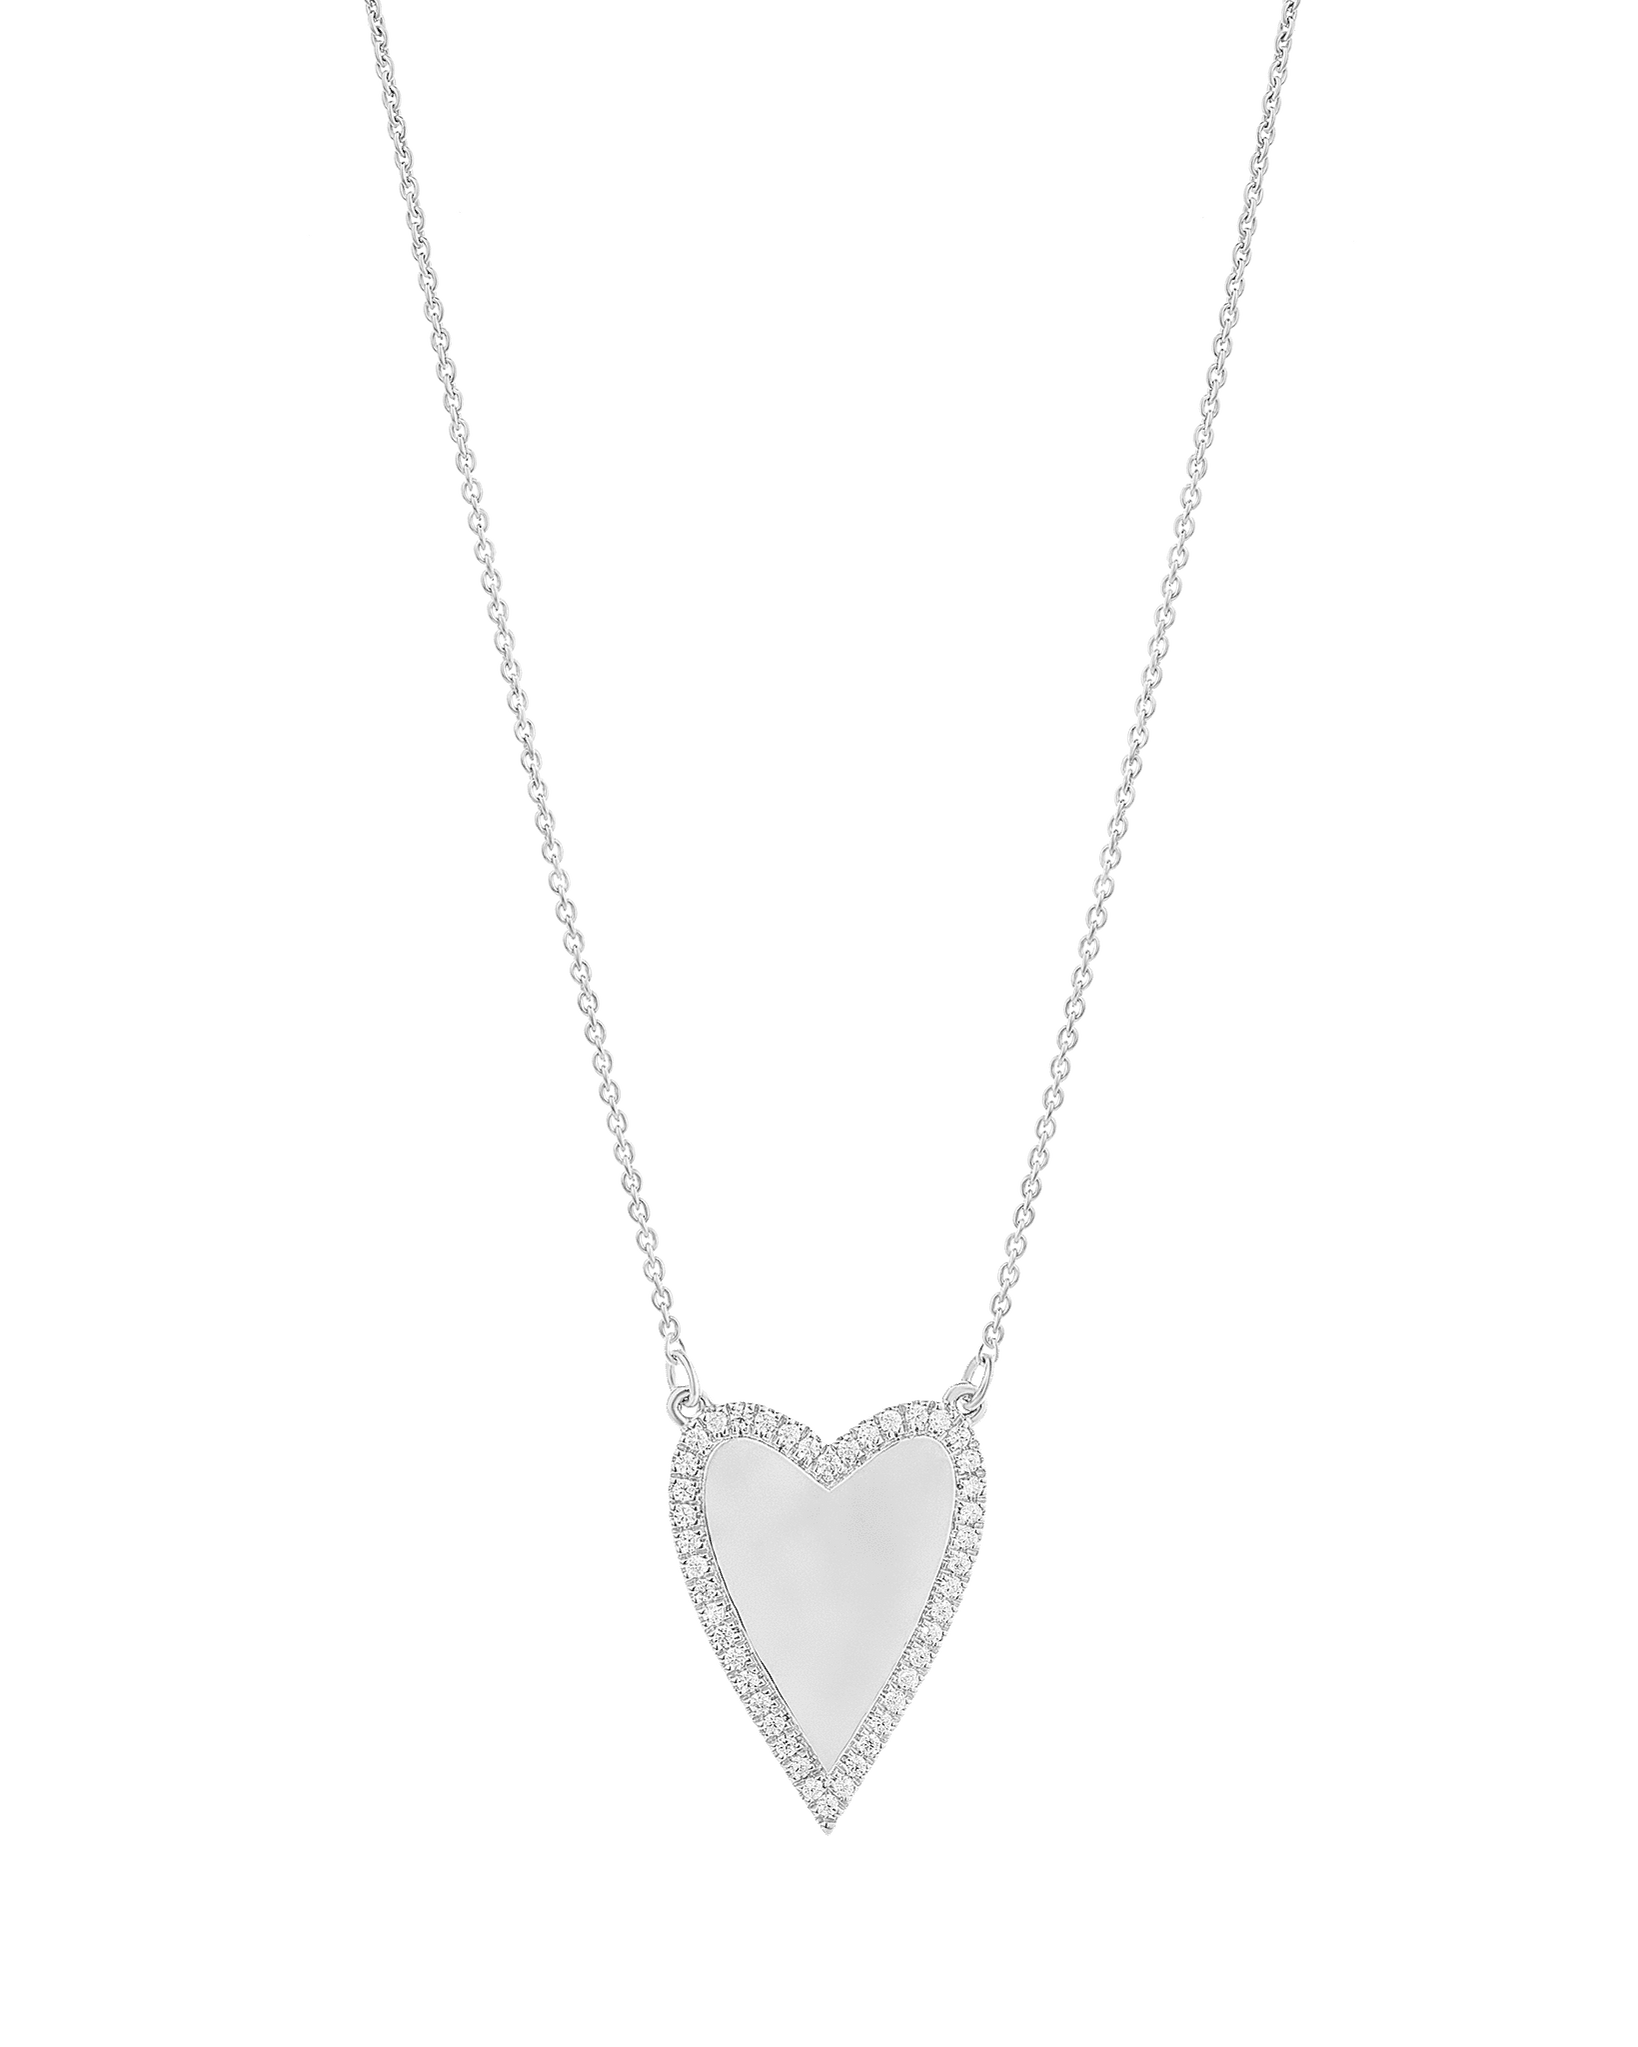 Outlined Heart Diamond Necklace - 14K Yellow Gold Necklaces magal-dev 